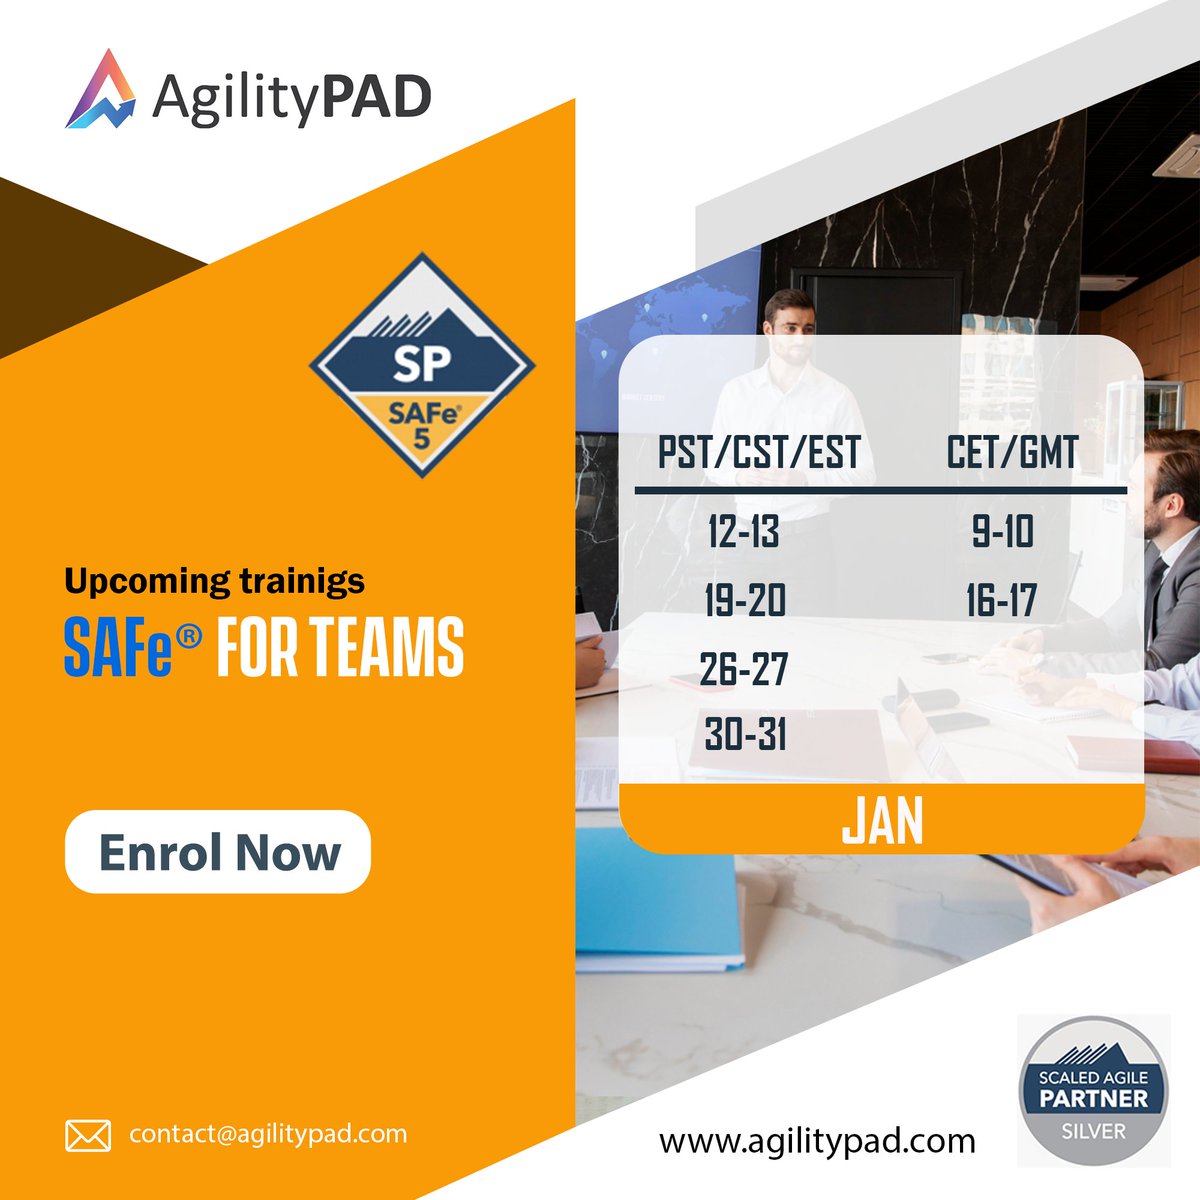 Enroll Now for Upcoming SAFe® for Teams (SP) Online Certification Training in January 2023!!✅Get $50 OFF!
agilitypad.com/safe-for-teams/

#agilecoach #agiletraining #team #agilitypad #designthinking #leadership #Leader #safeforteam #managertraining #training #devops #lean #agile